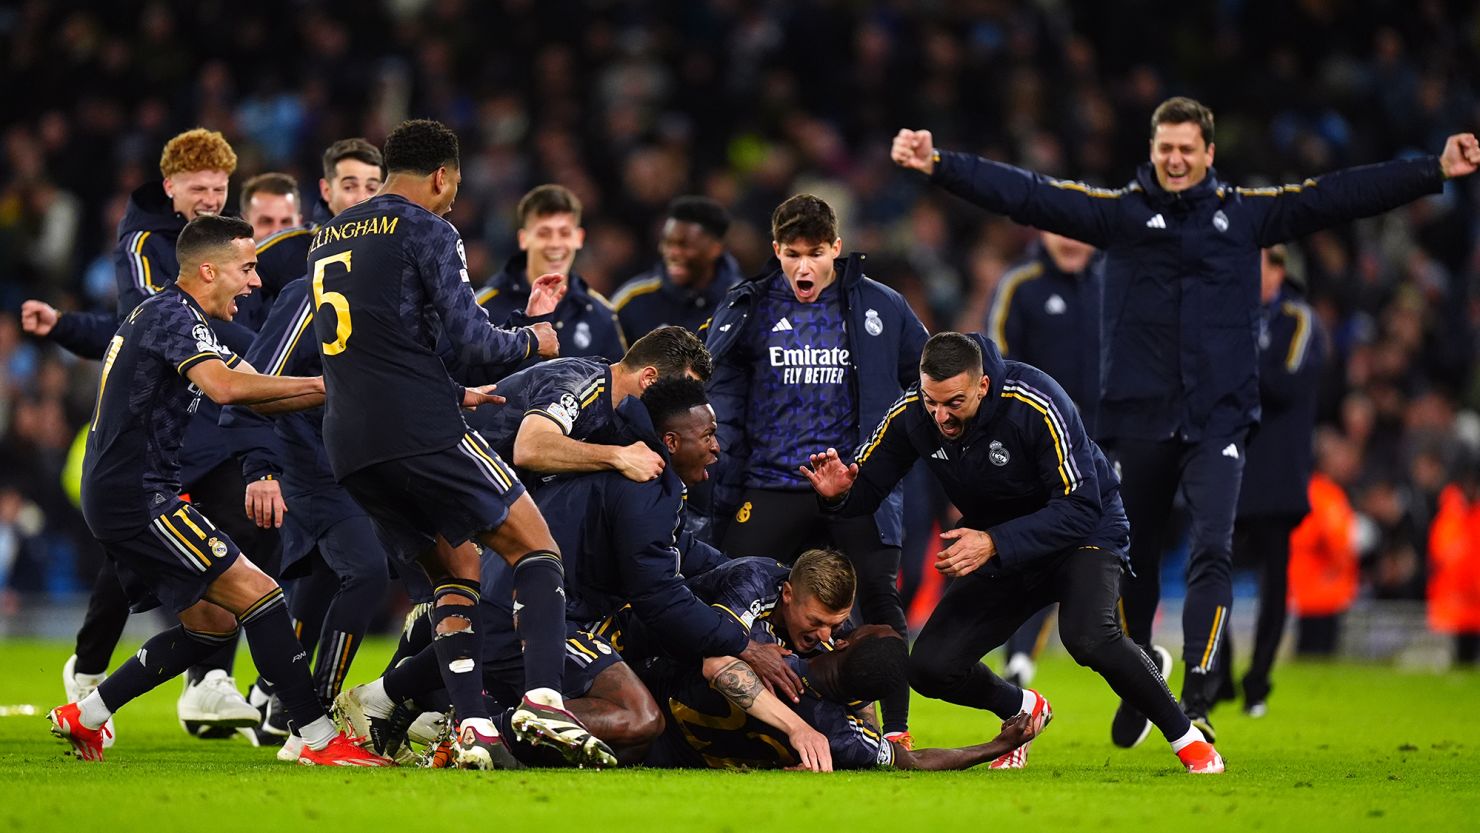 Real Madrid's players celebrate defeating Manchester City in the Champions League quarterfinals.